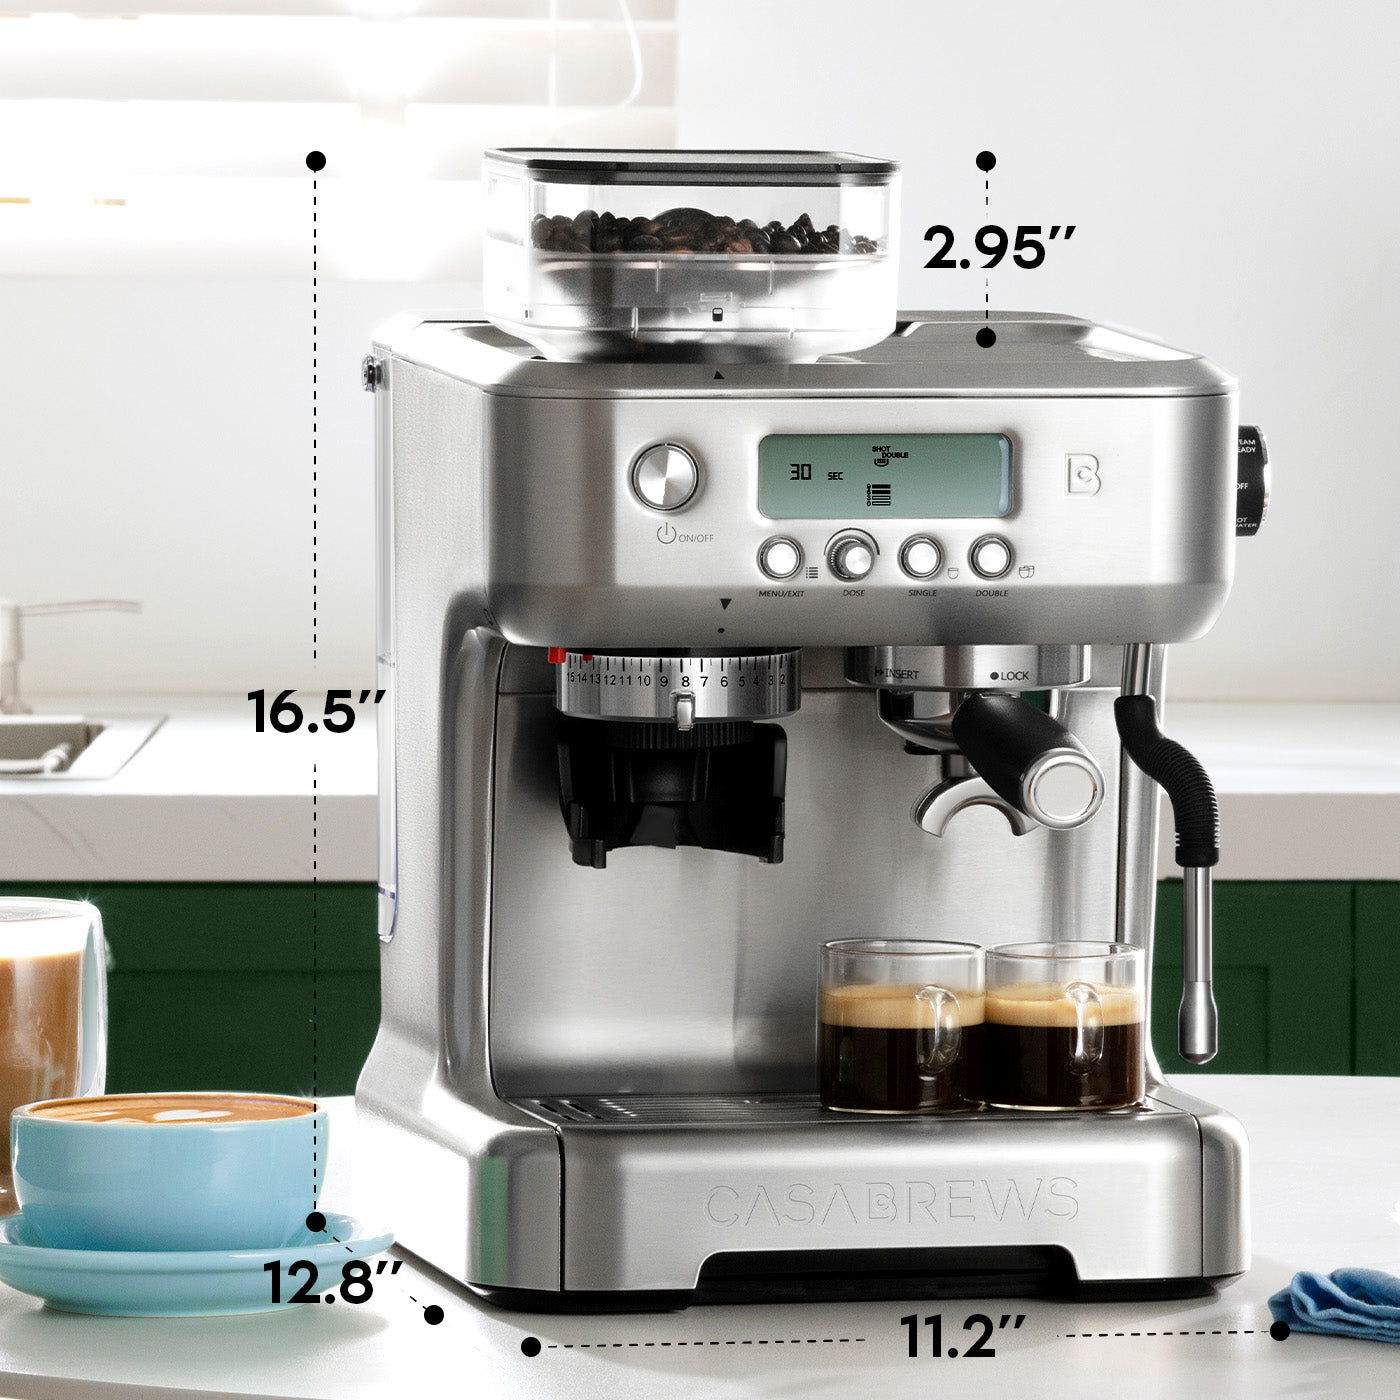 All-in-one Coffee Machine for Home Office Cafe Small Expresso